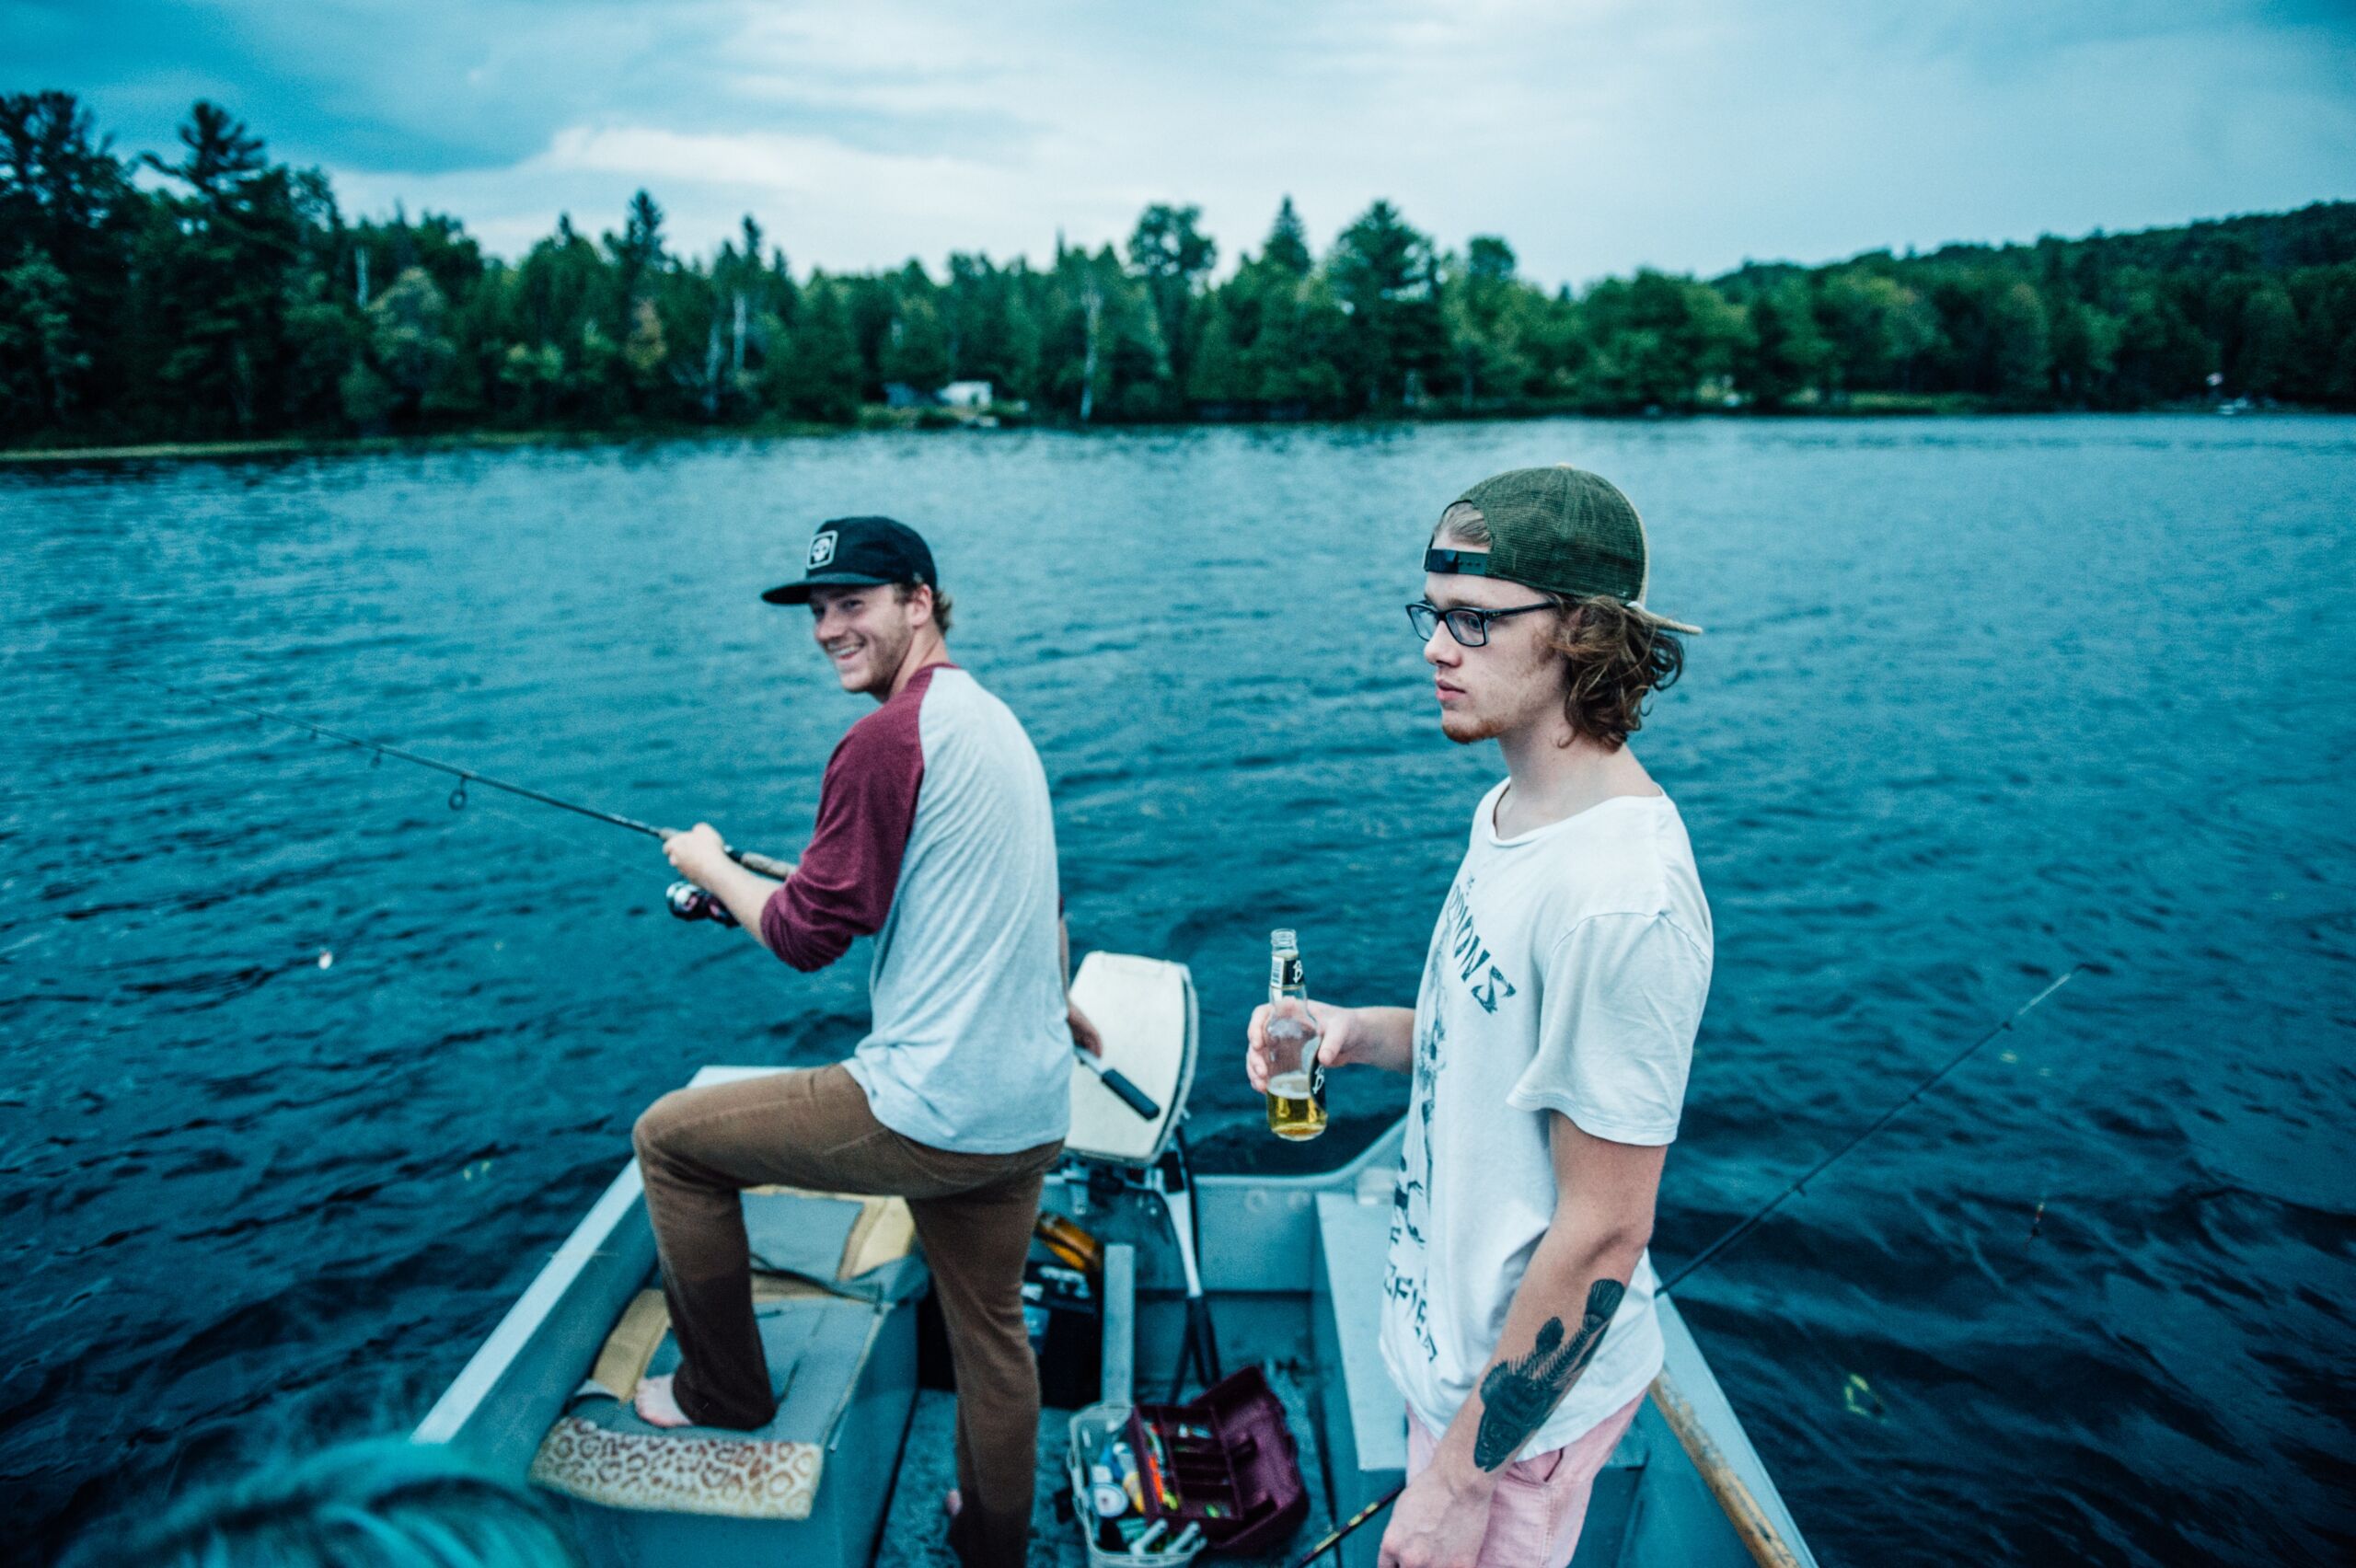 Two men are fishing on a boat in the water.